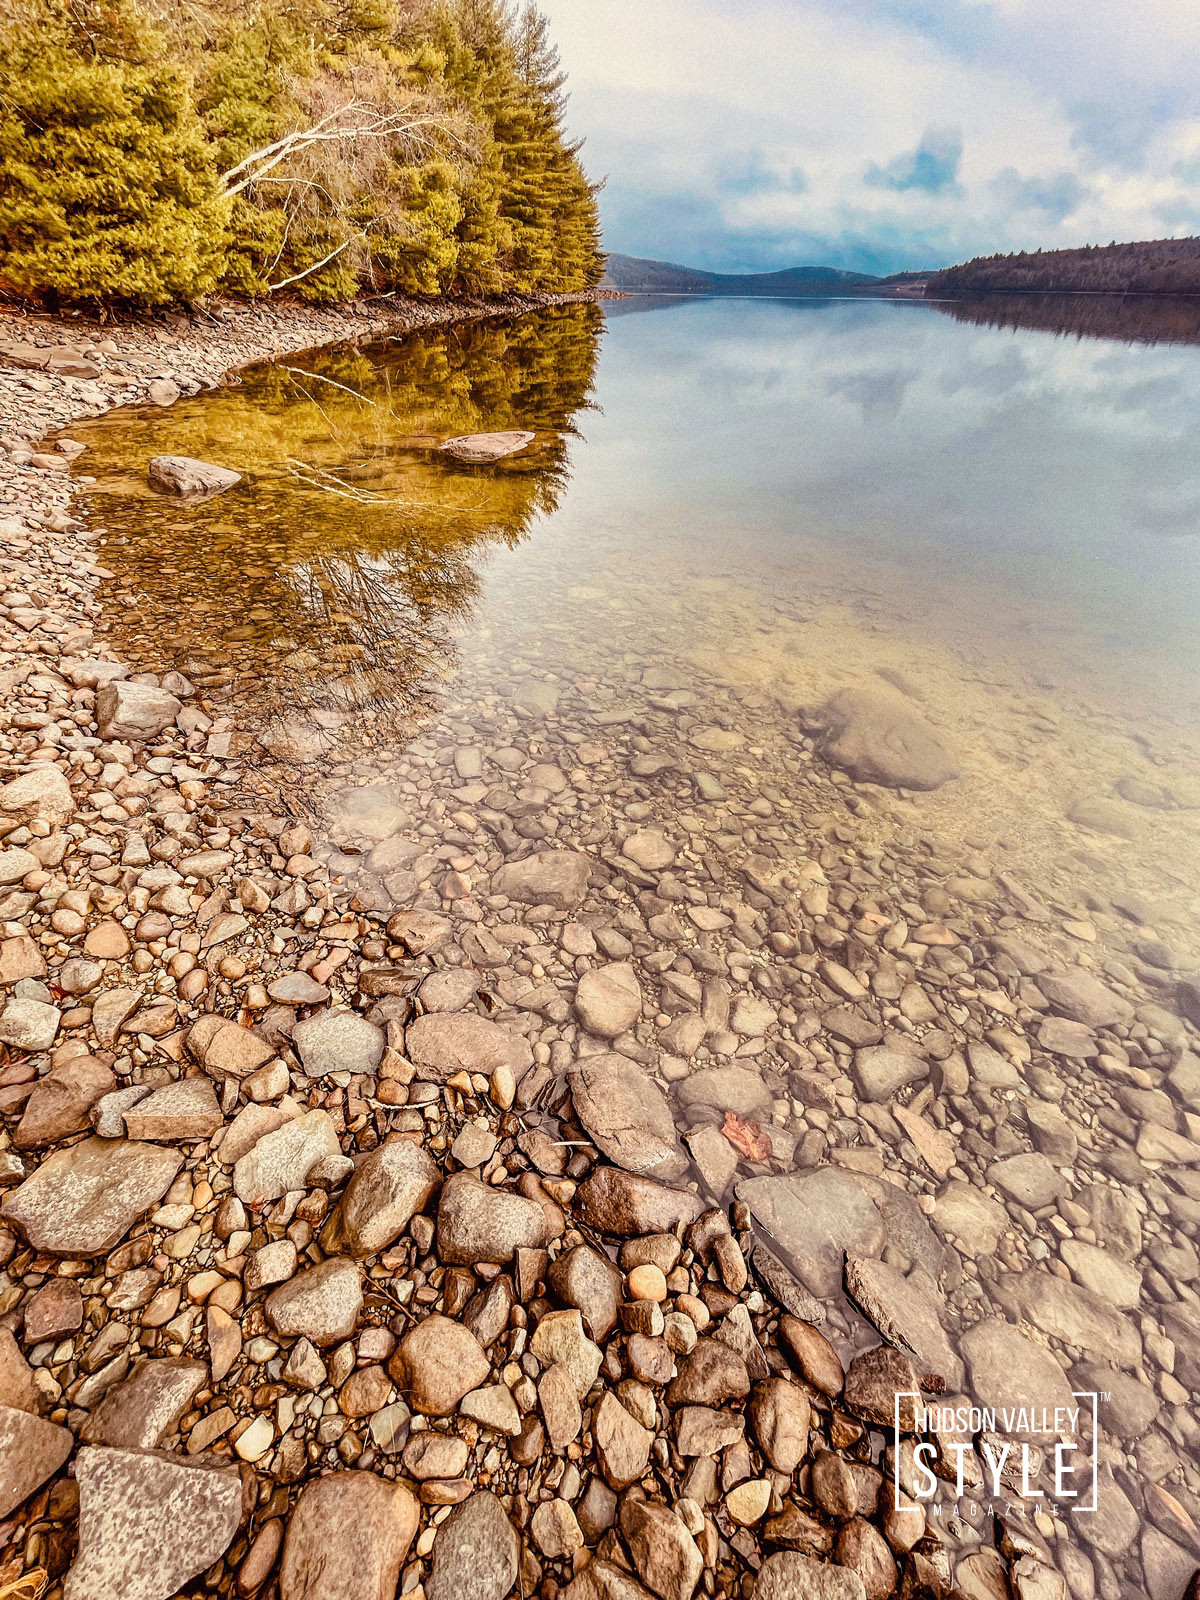 Roundout Reservoir in Catskill Mountains – Photo Story by Maxwell Alexander – Nature photography – Canvas Photo Prints – Wall Art